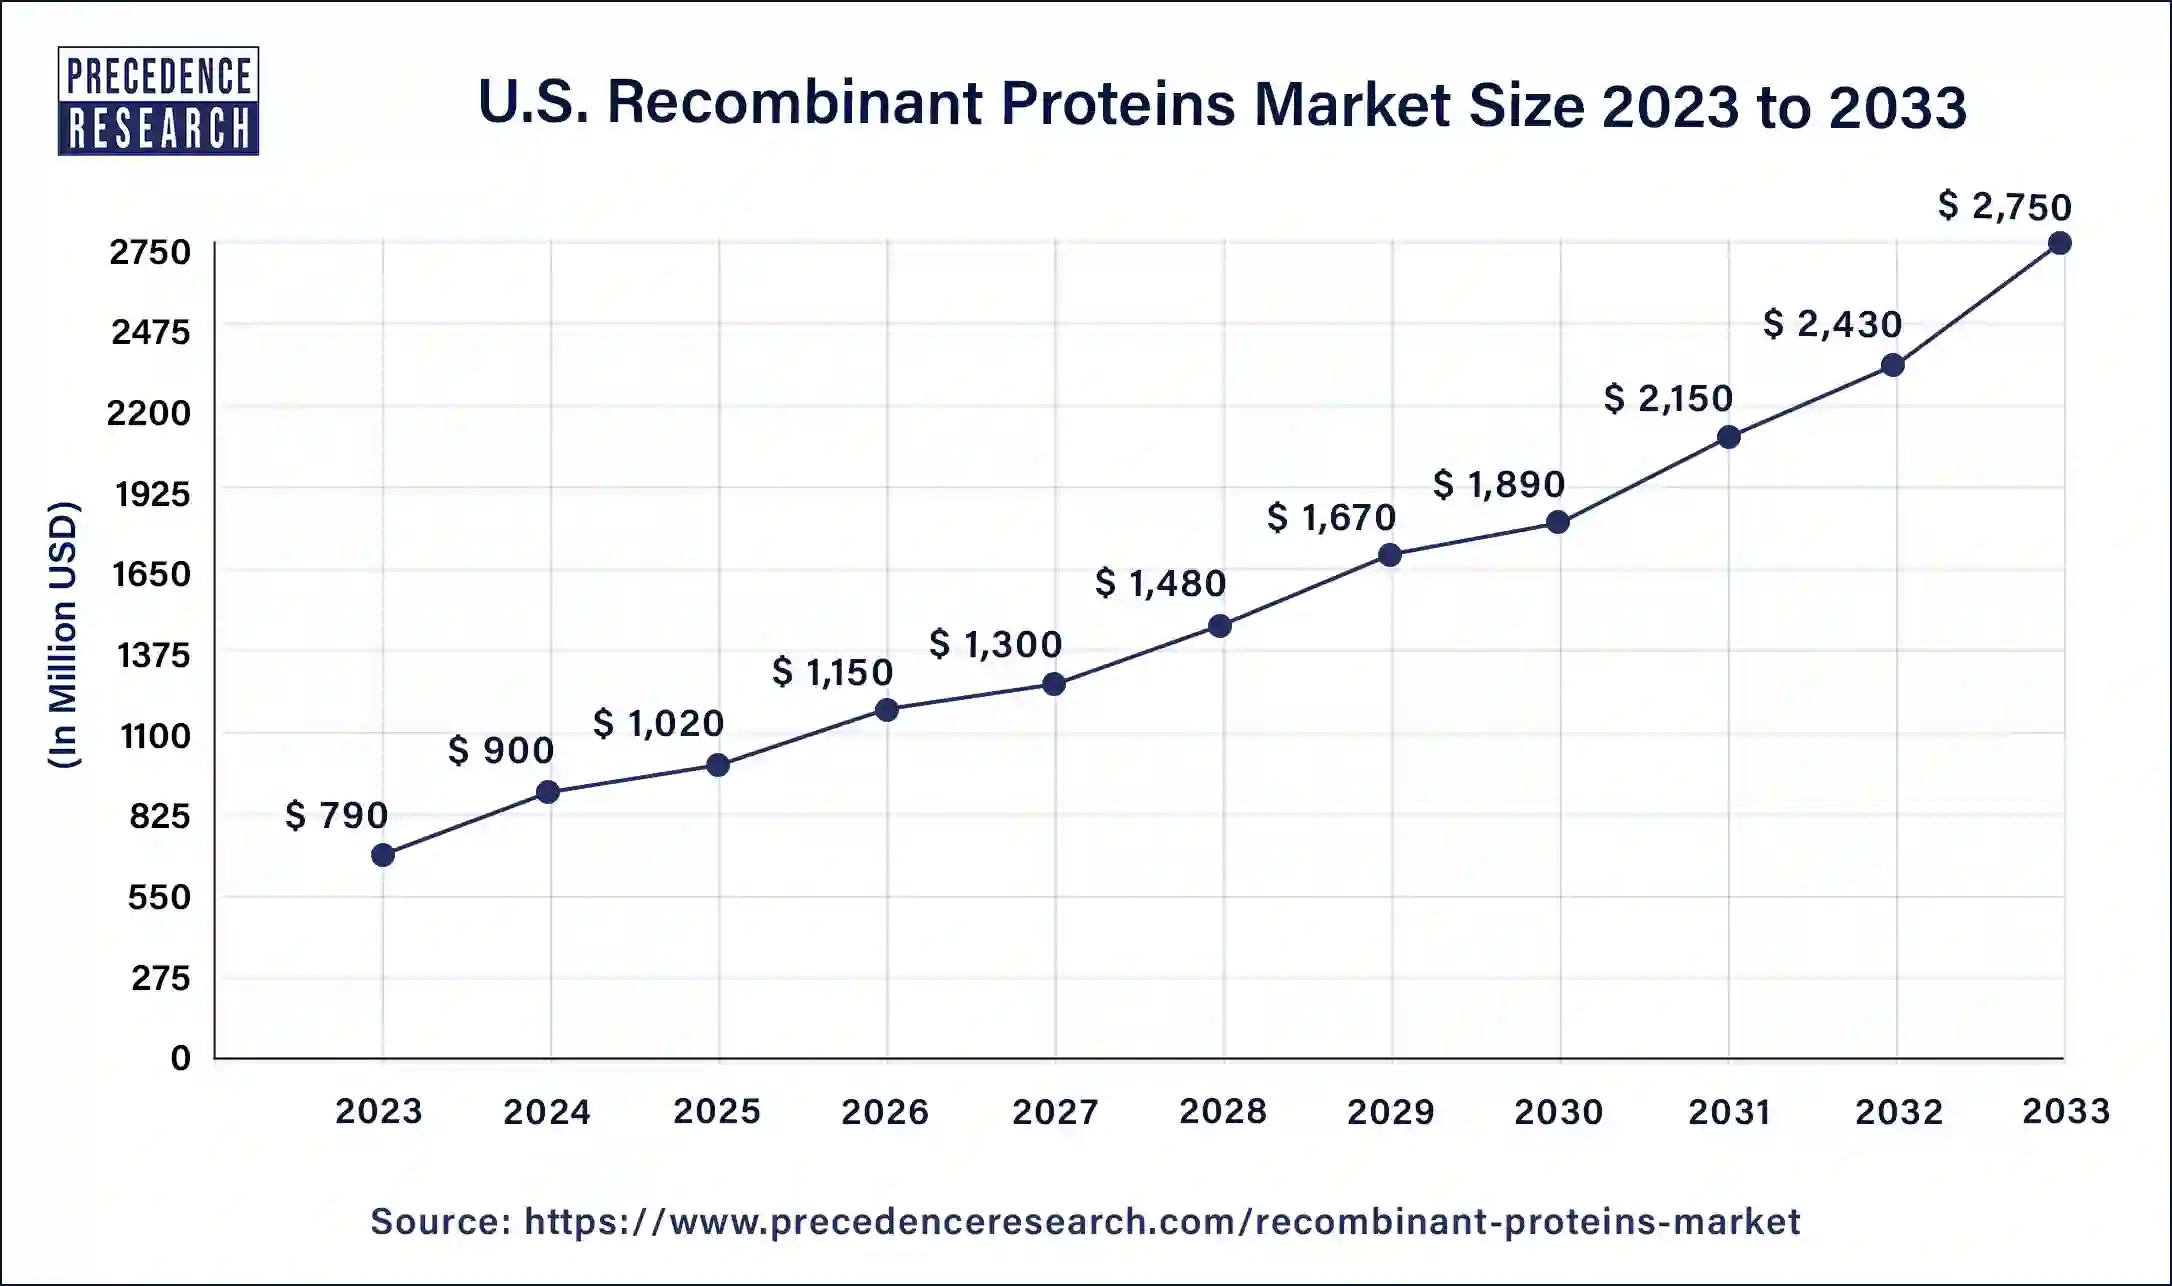 U.S. Recombinant Proteins Market Size 2024 to 2033